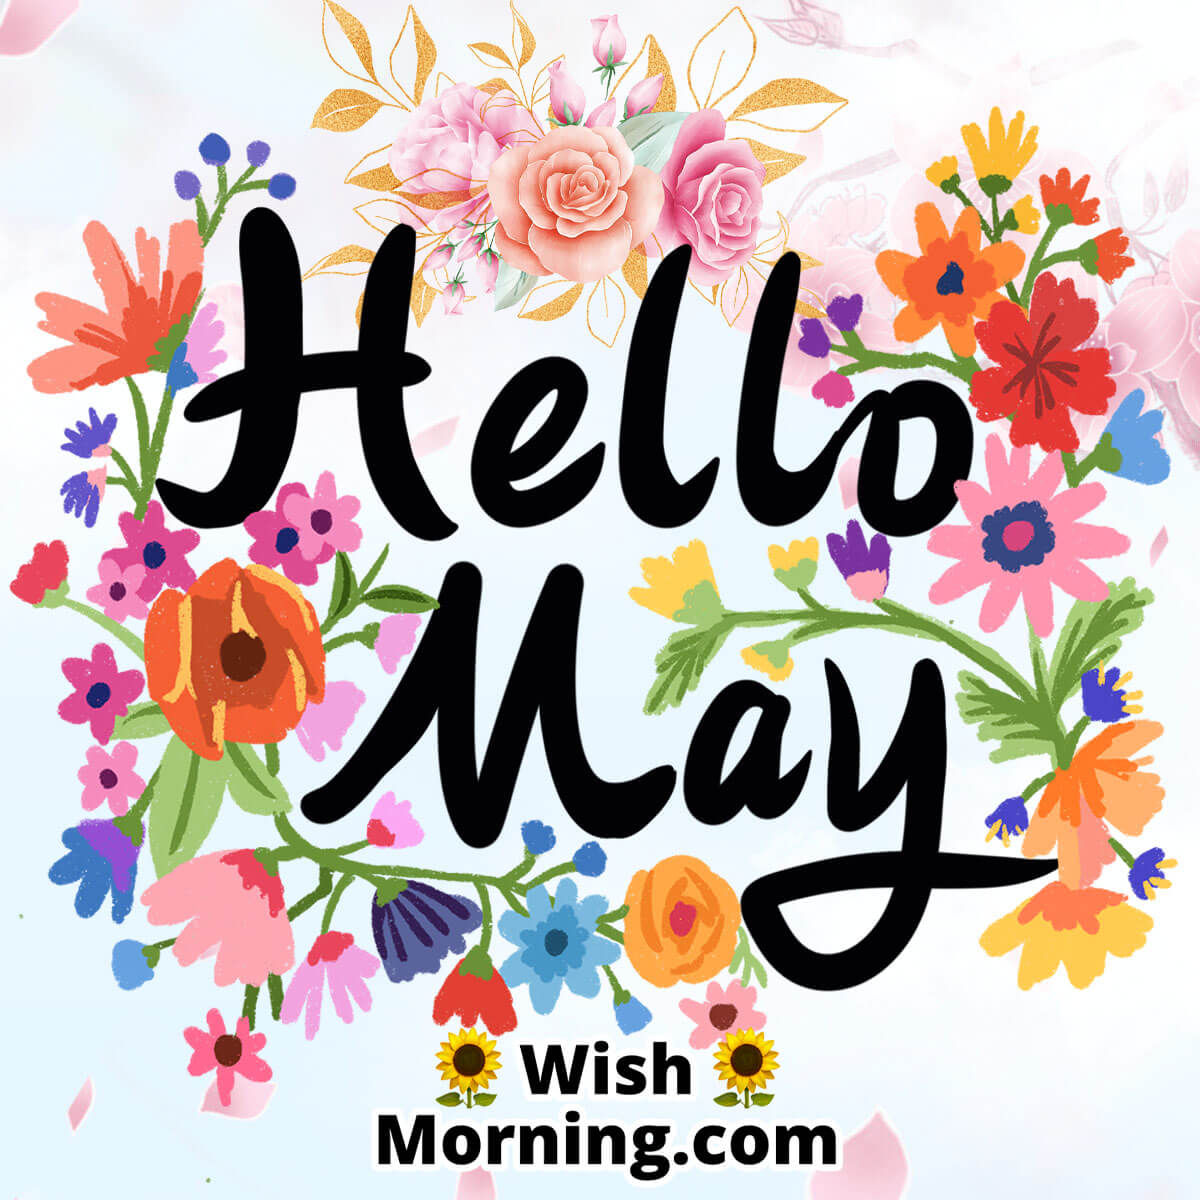 May Month Wishes - Wish Morning